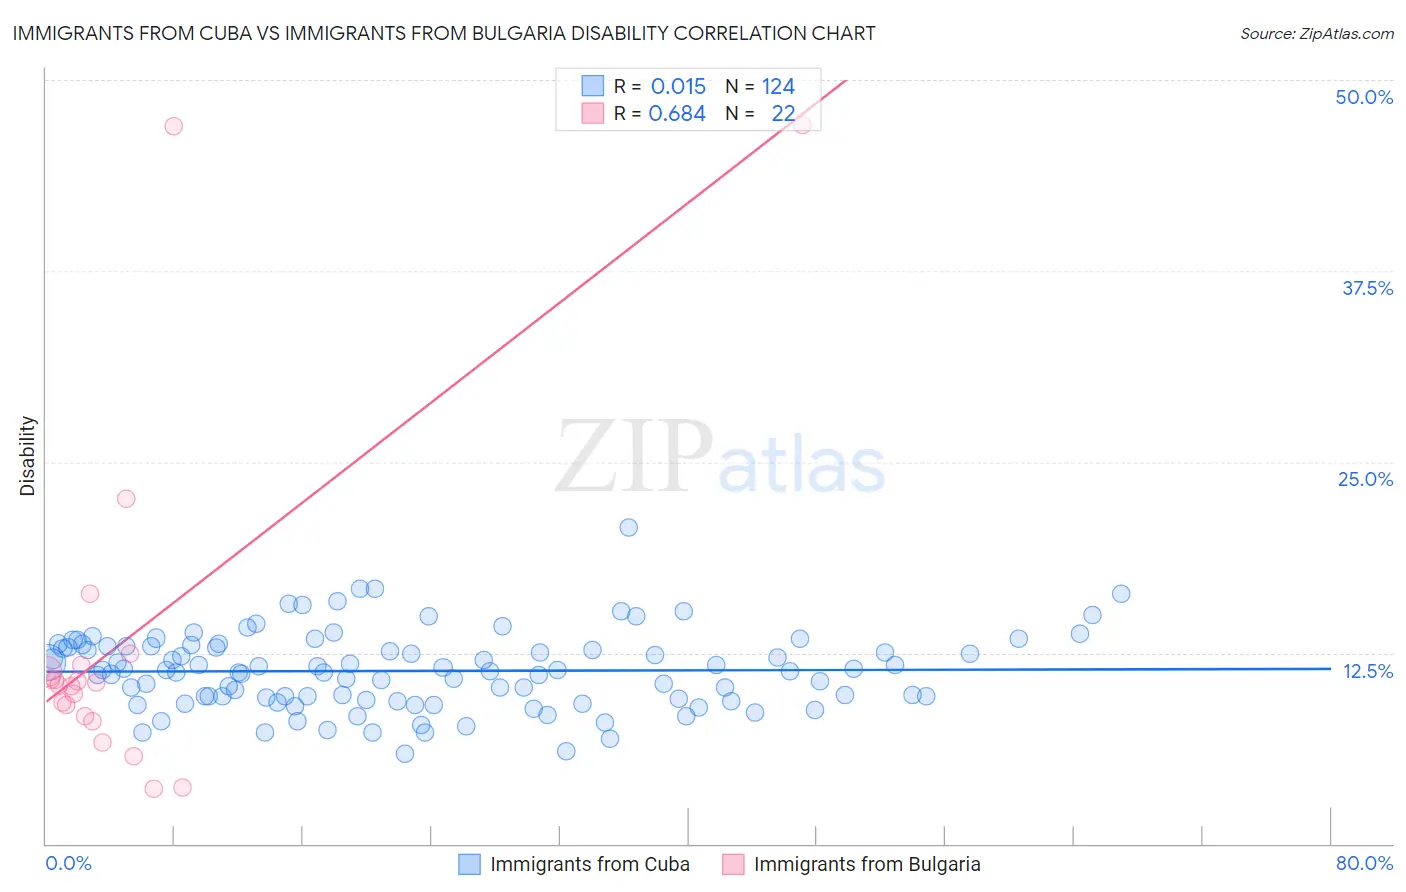 Immigrants from Cuba vs Immigrants from Bulgaria Disability